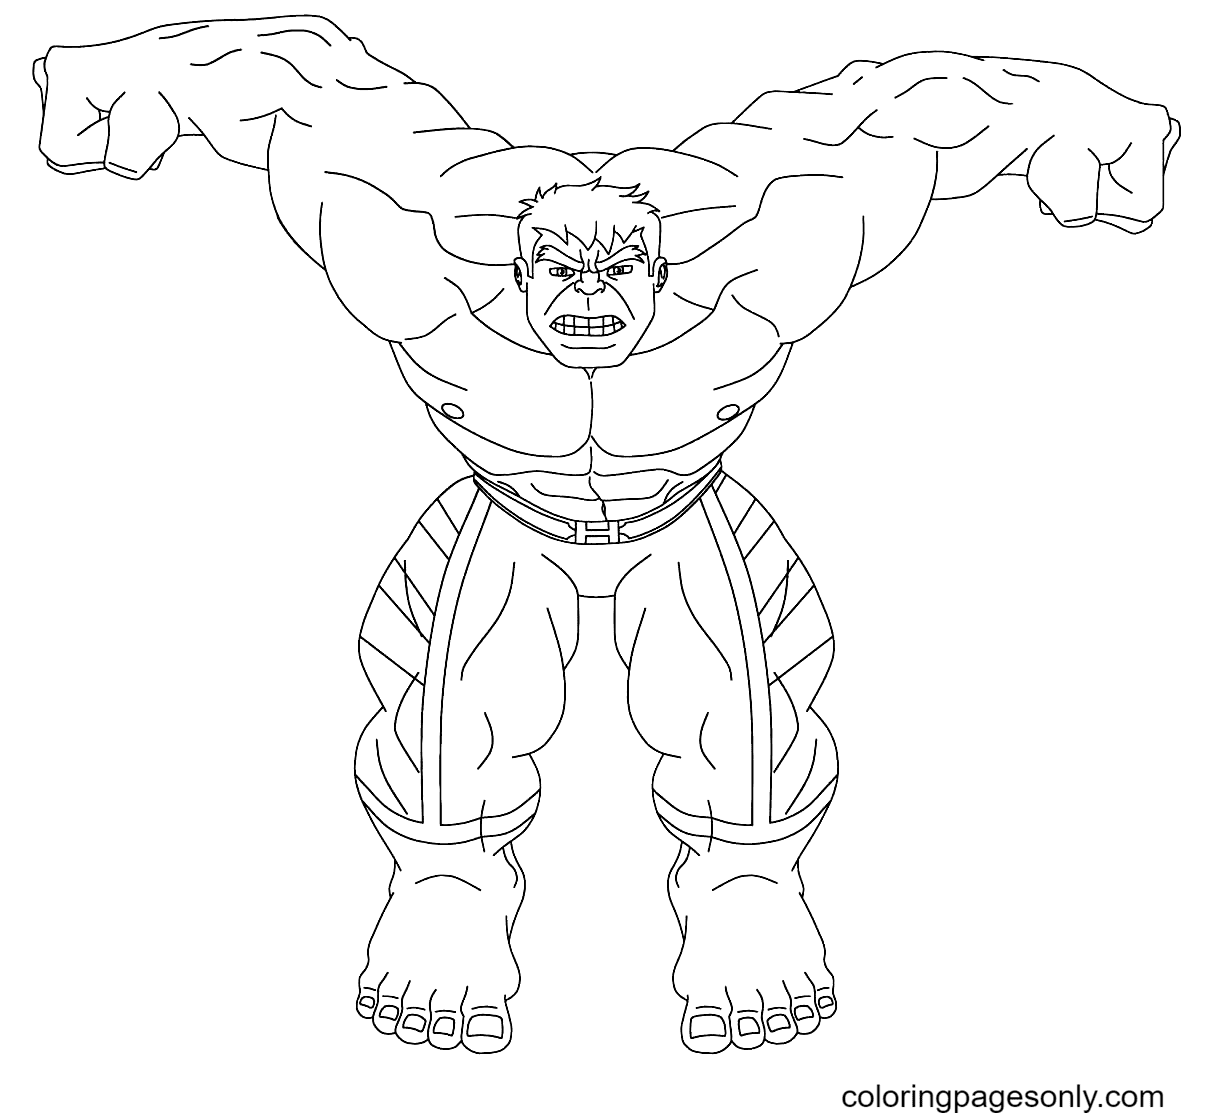 Free Hulk Coloring Pages   Hulk Coloring Pages   Coloring Pages ...